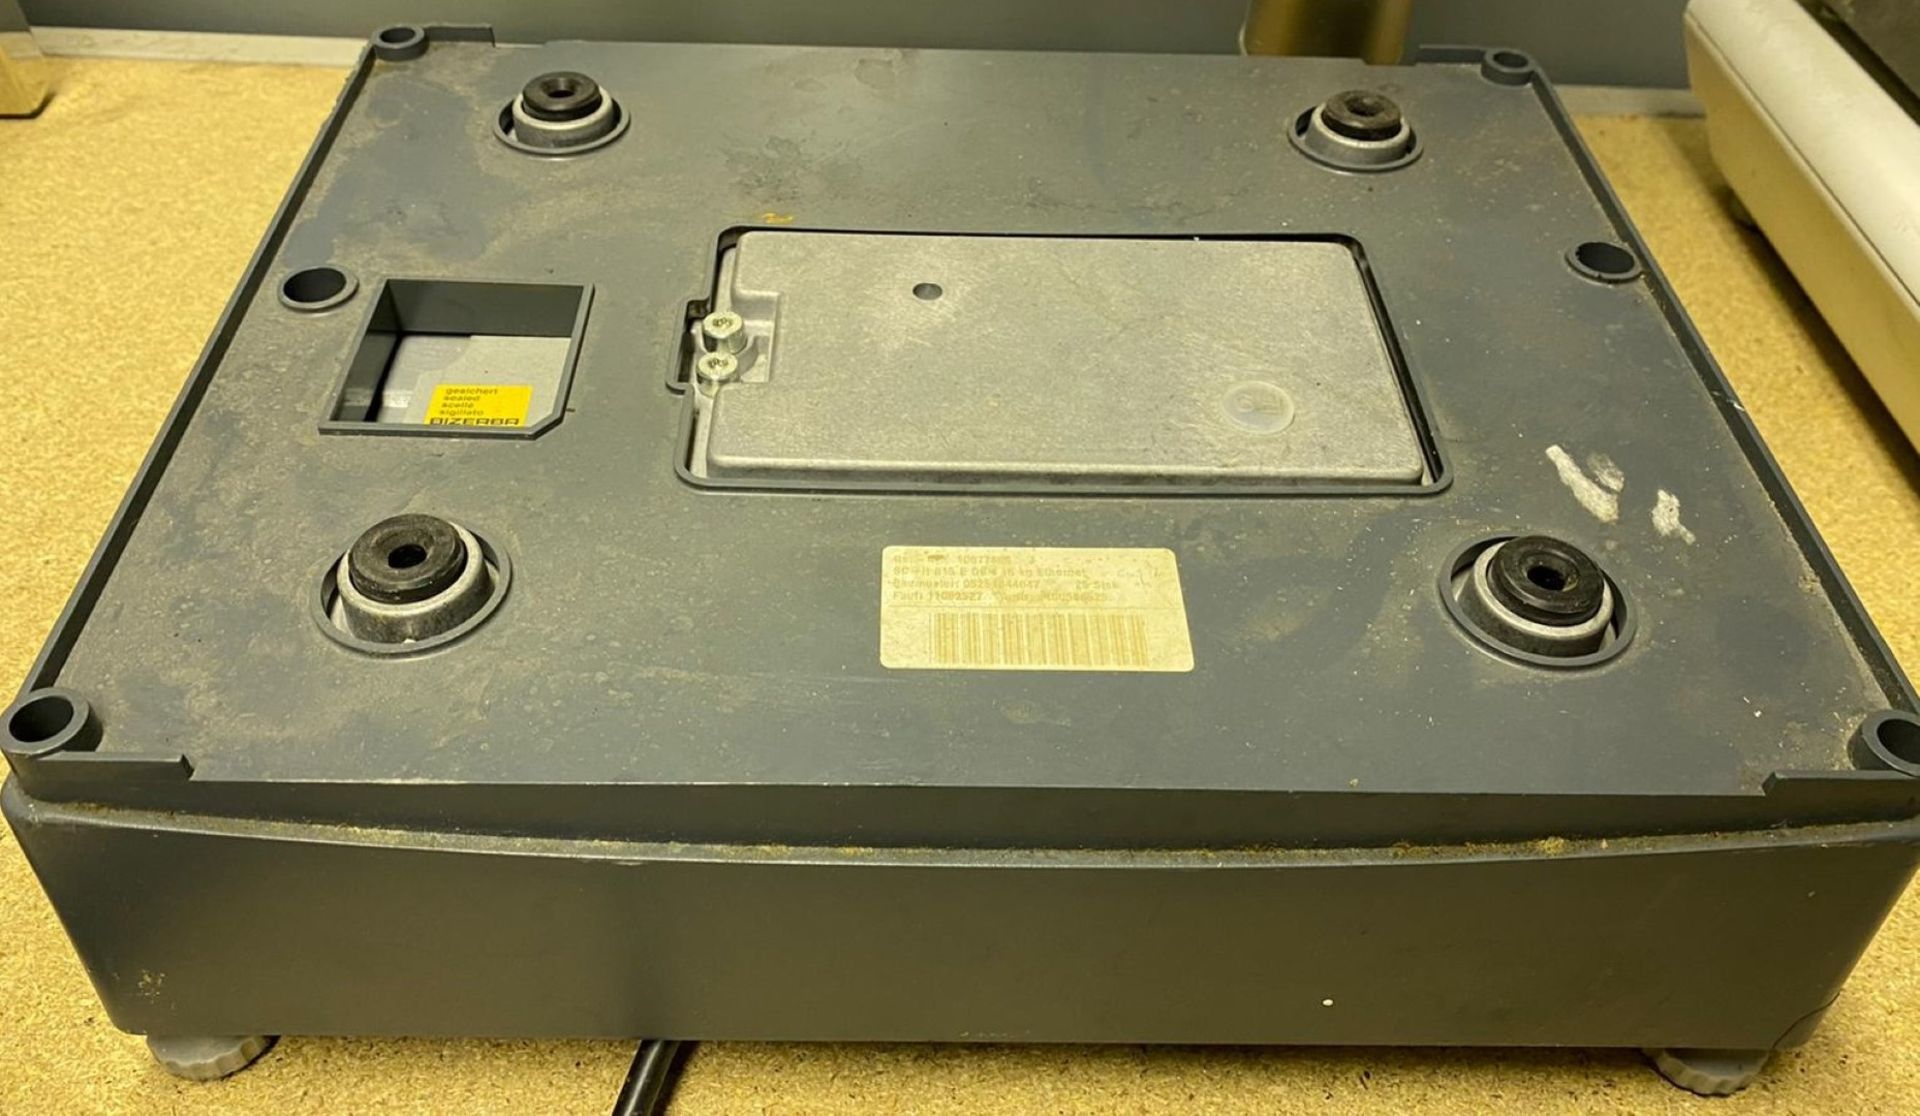 1 x Bizerba SC-H 800 Basic Retail Weighing Scale - Used Condition - Location: Altrincham WA14 - - Image 10 of 10